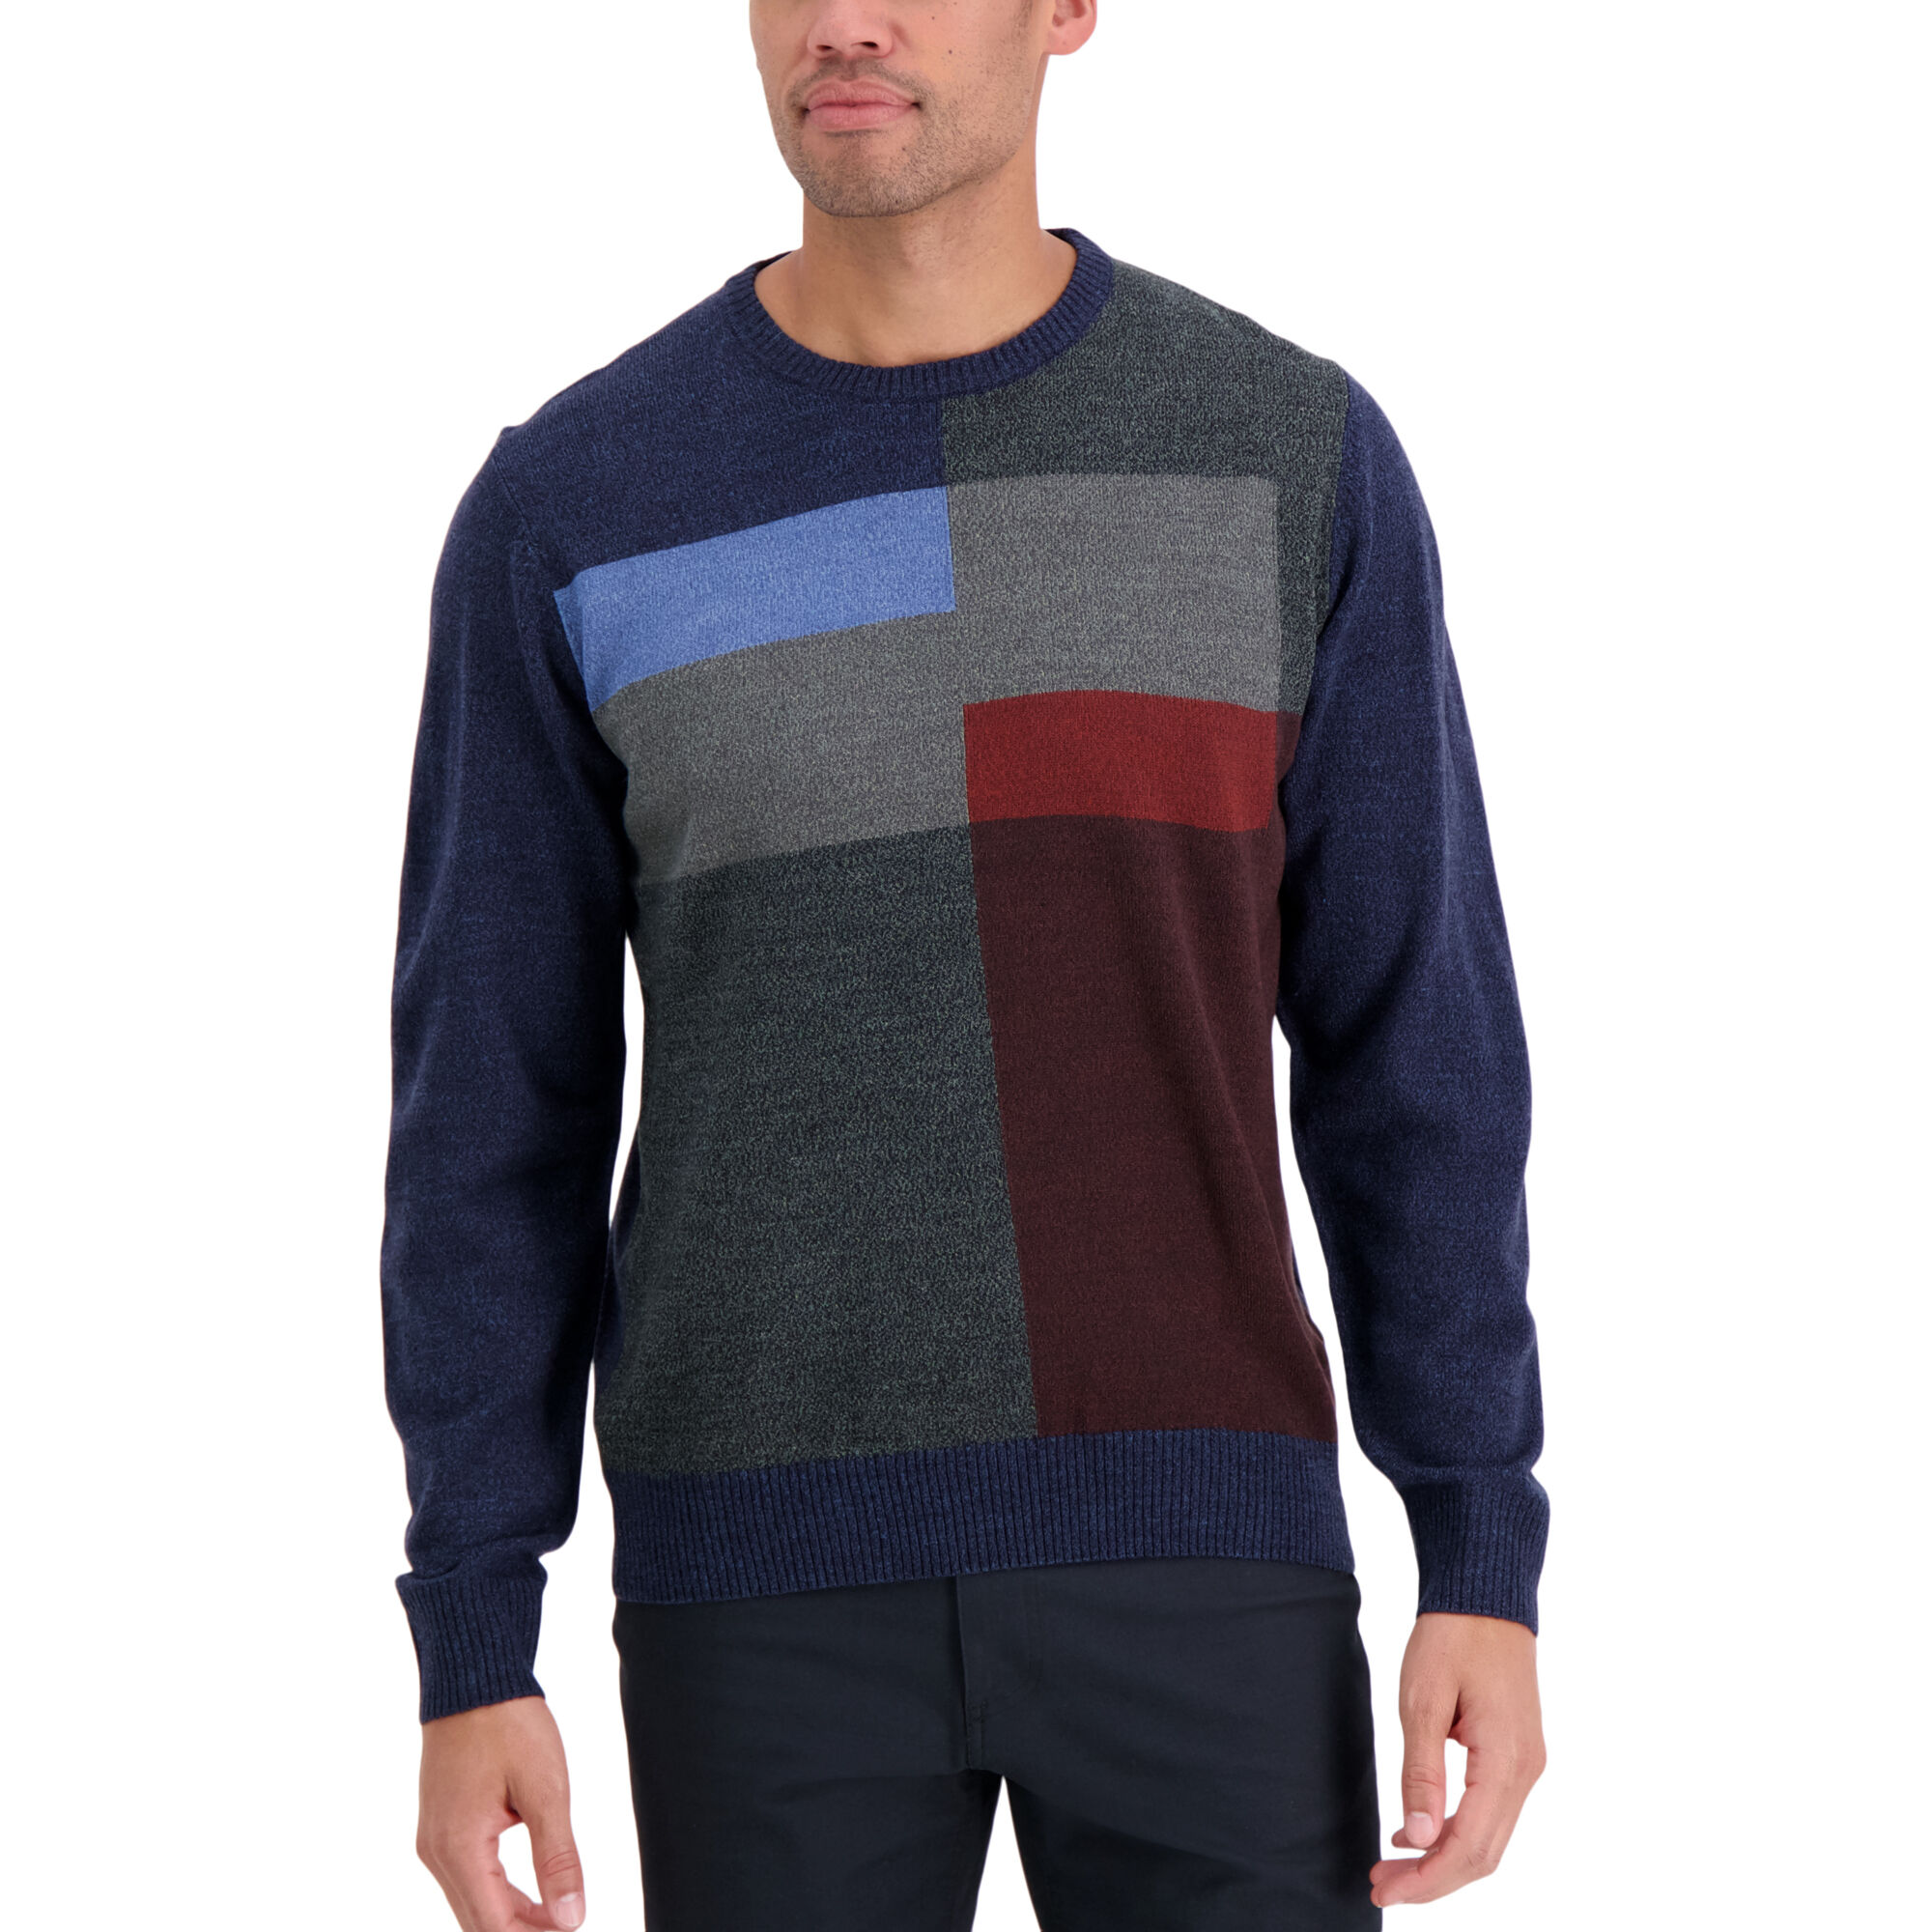 Haggar Soft Acrylic Patchwork Sweater Navy (HGHF0S6096 Clothing Shirts & Tops) photo